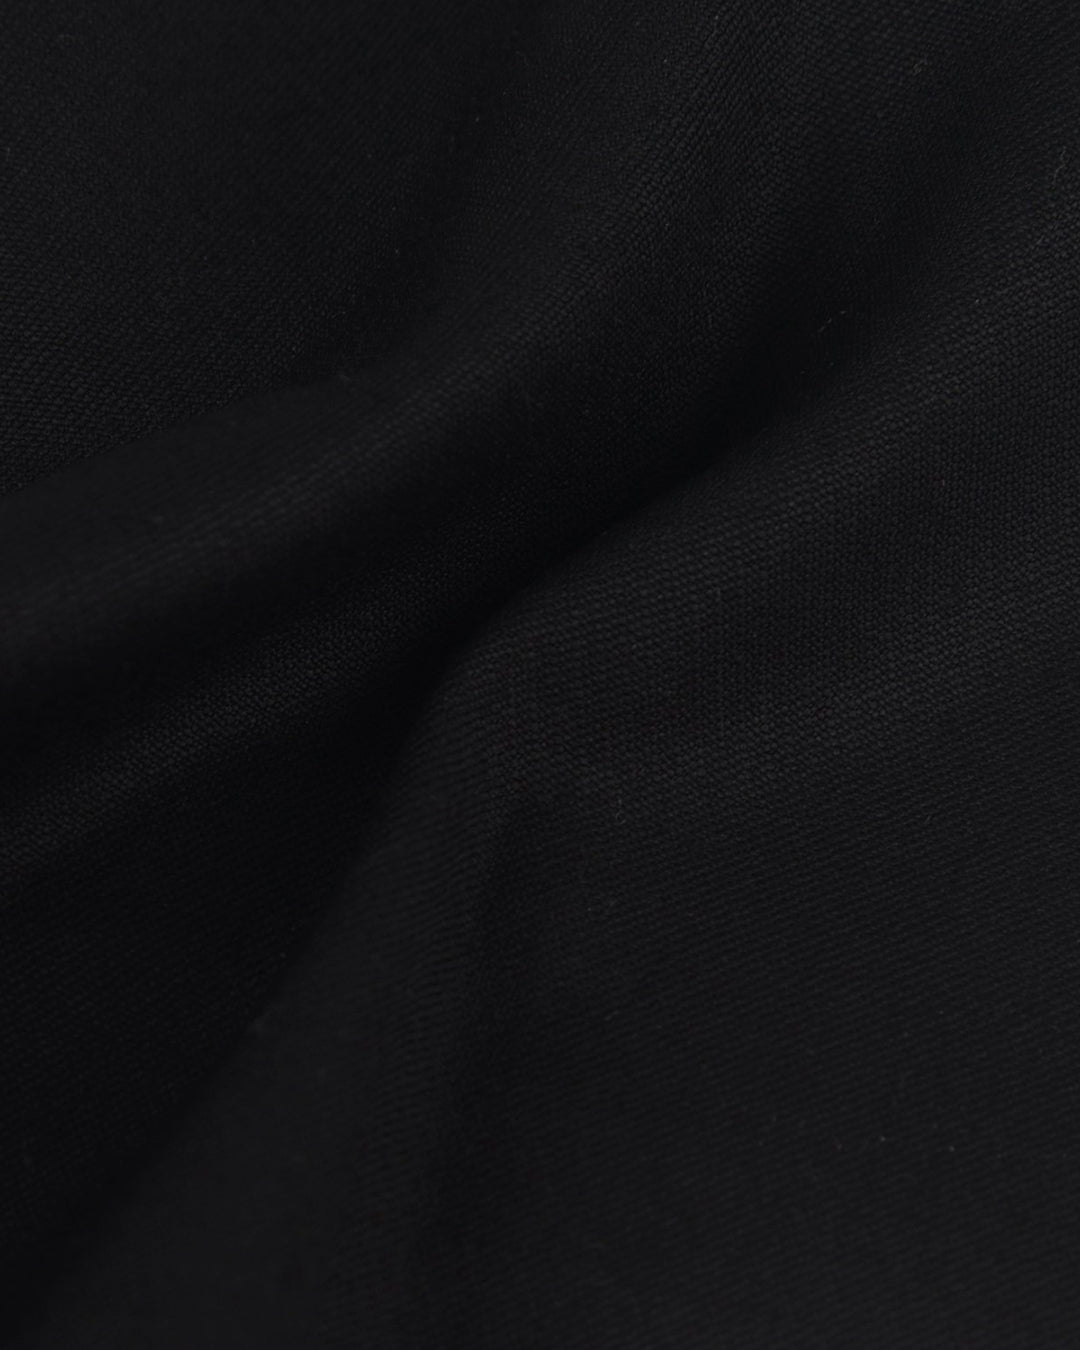 Cavalry Twill Fabric: The Most Durable Option For Your Clothing